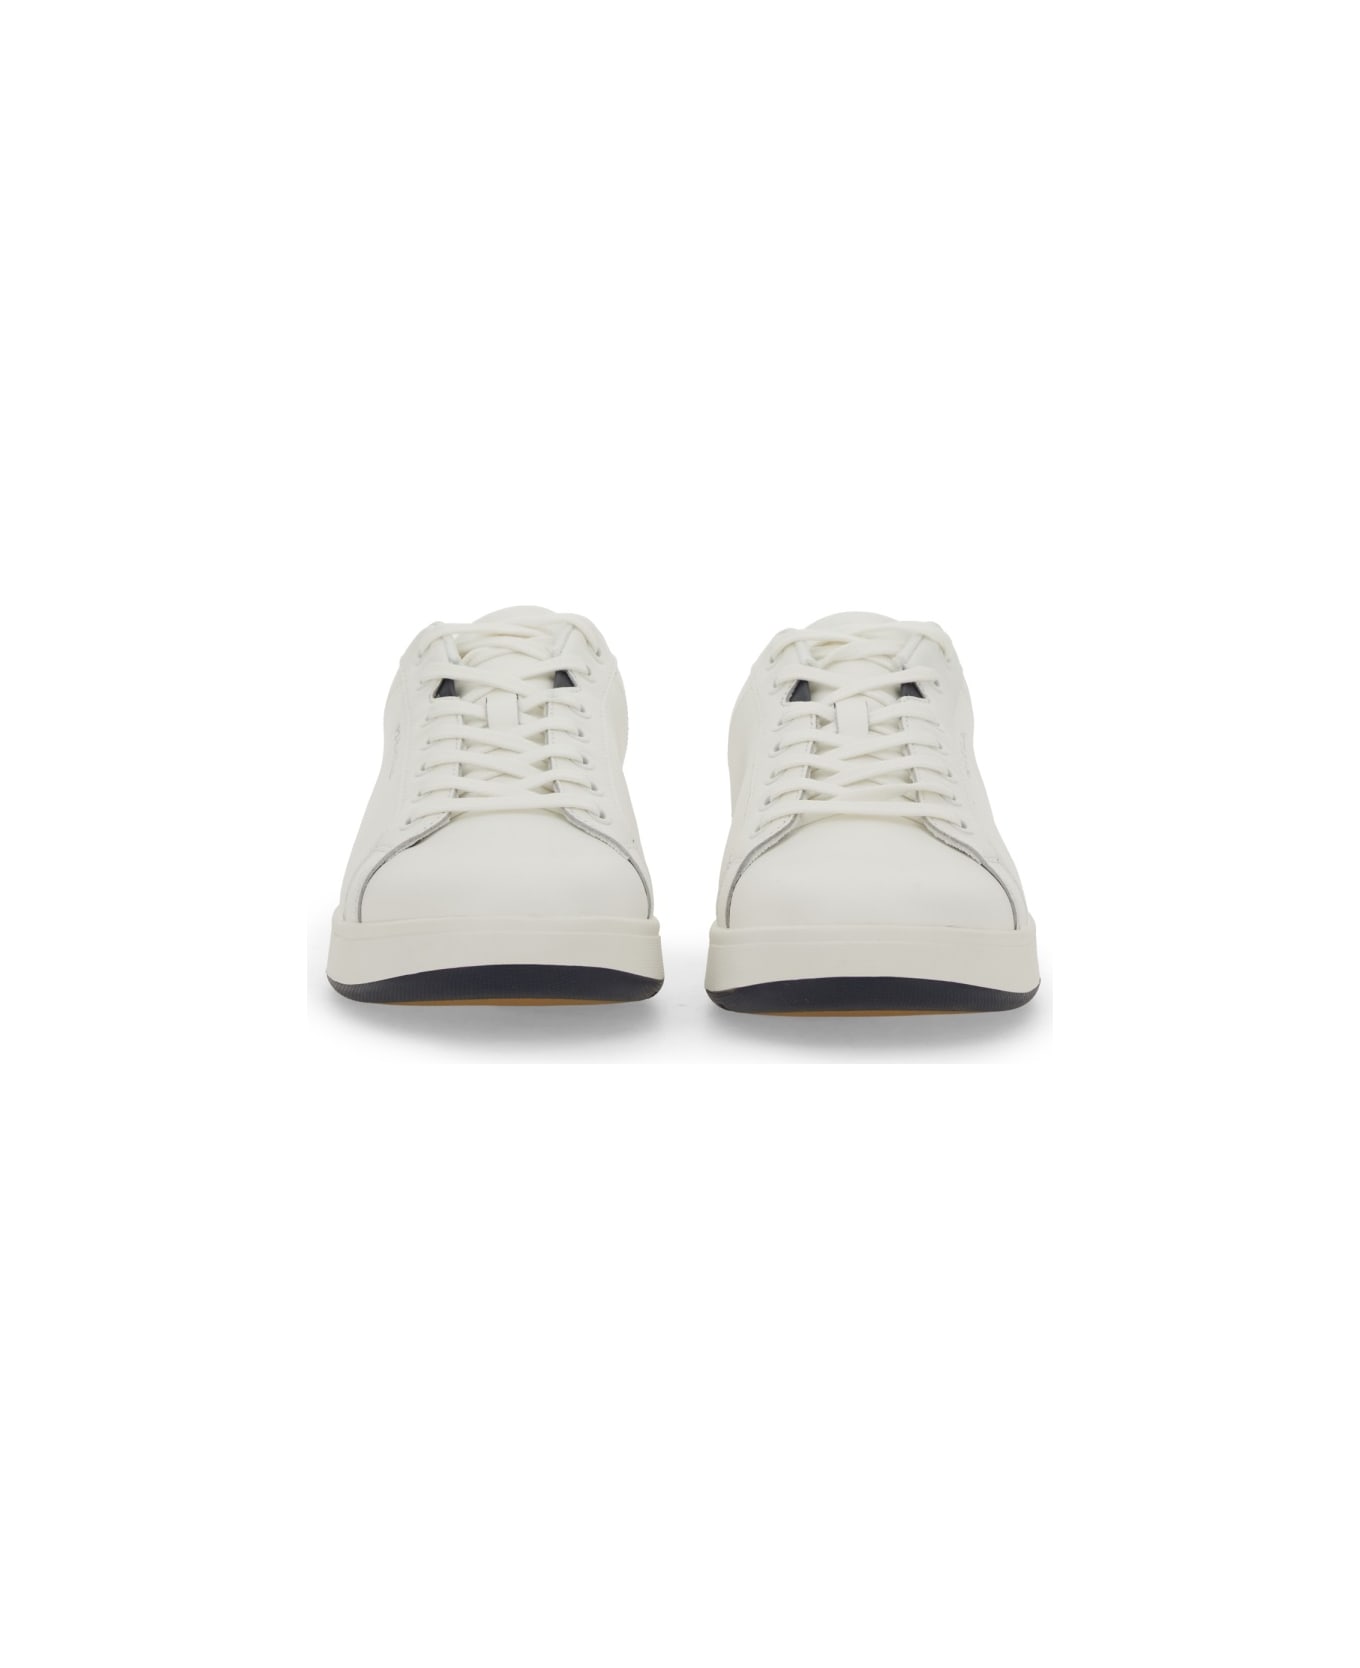 PS by Paul Smith "albany" Sneaker - WHITE